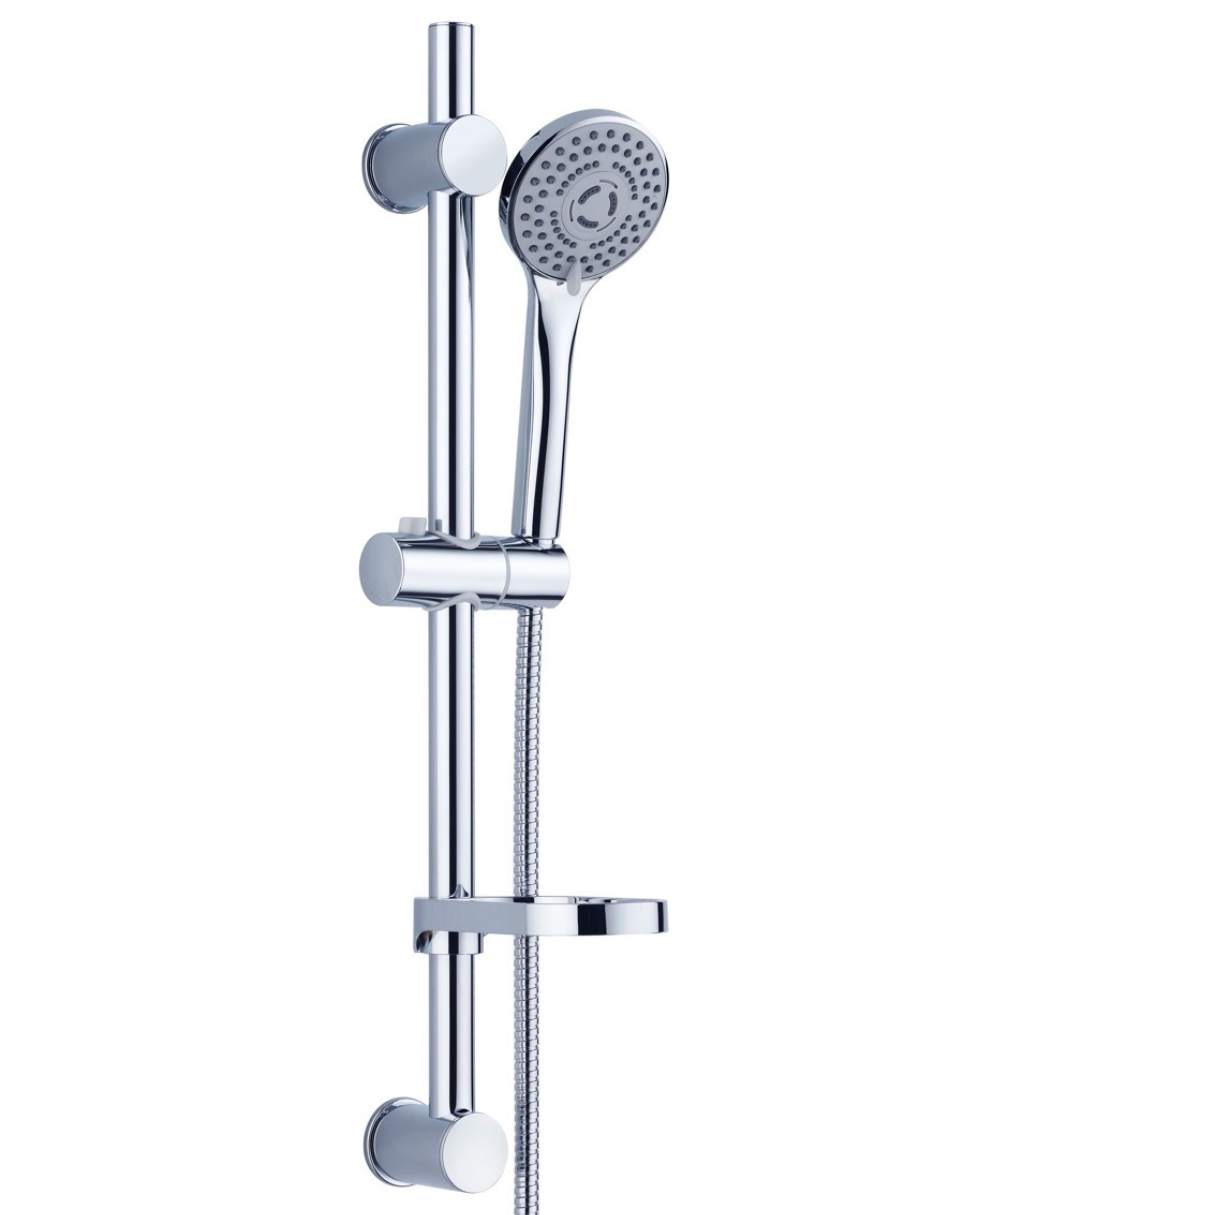 How To Replace Showerhead With Bar